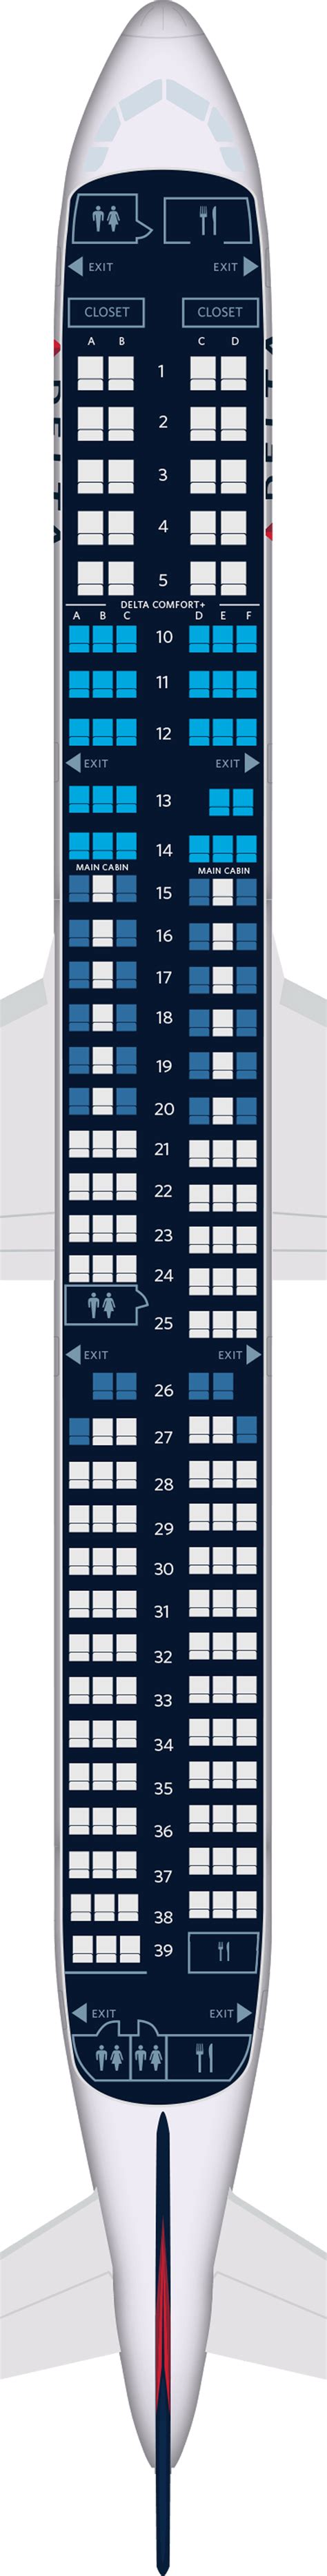 For your next Lufthansa flight, use this seating chart to get the most comfortable seats, legroom, and recline on . Seat Maps; Airlines; Cheap Flights; Comparison Charts. Short-haul Economy Class ... View map: Airbus A321neo (321) Standard Business (Rows 1-8) Standard Economy (Rows 9-39) Viewing. SeatGuru was created to help travelers choose ...